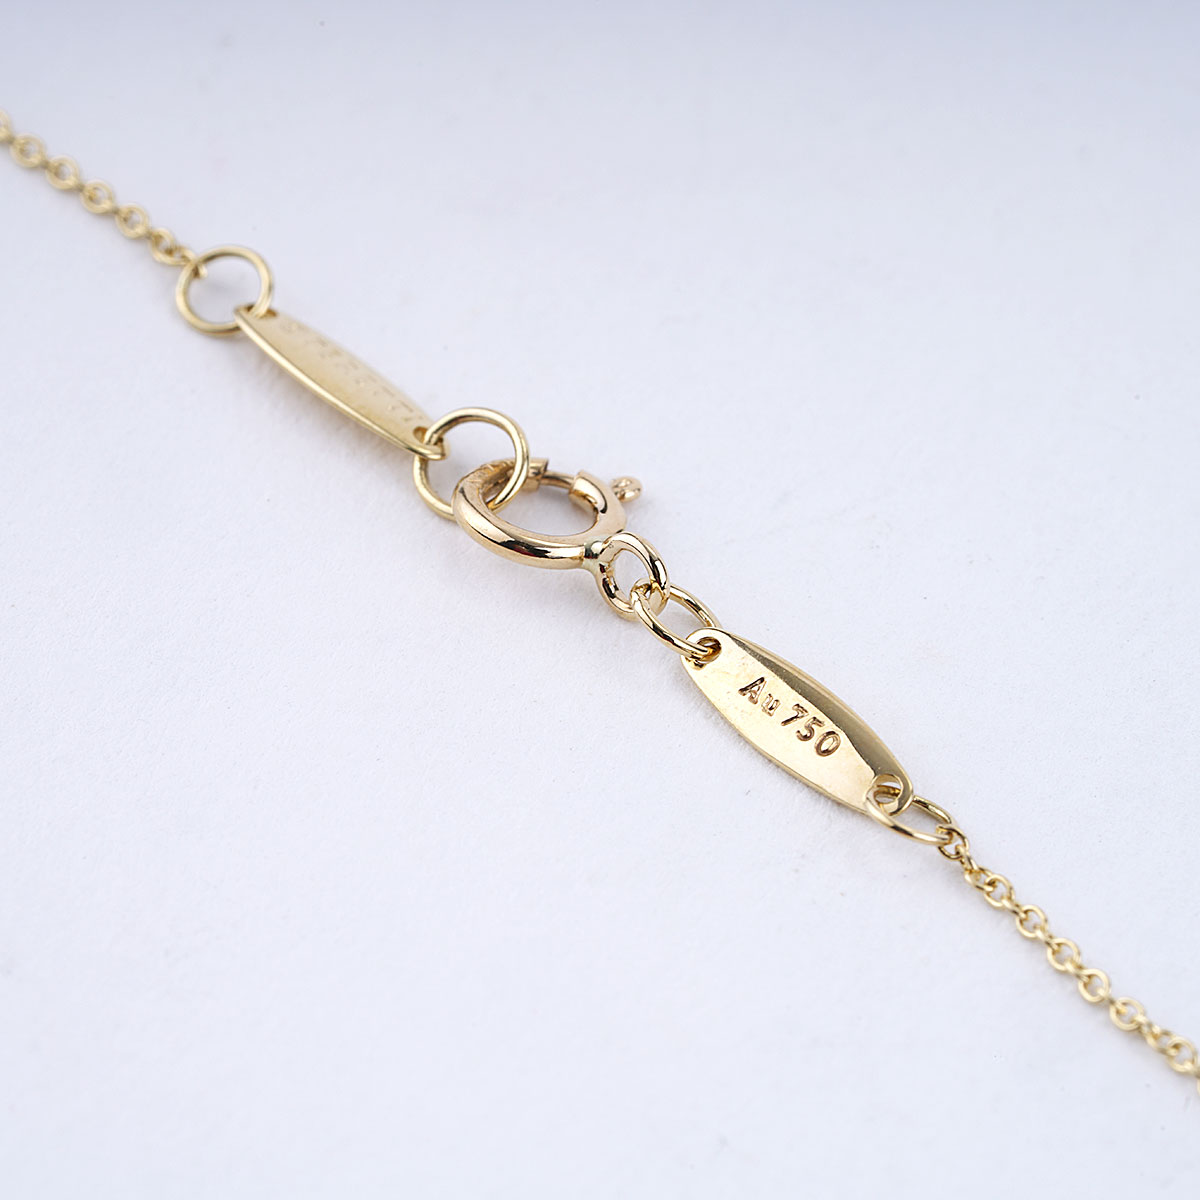 Vintage Tiffany & Co. Open Heart Necklace - Shop Jewelry - Shop Jewelry,  Watches & Accessories